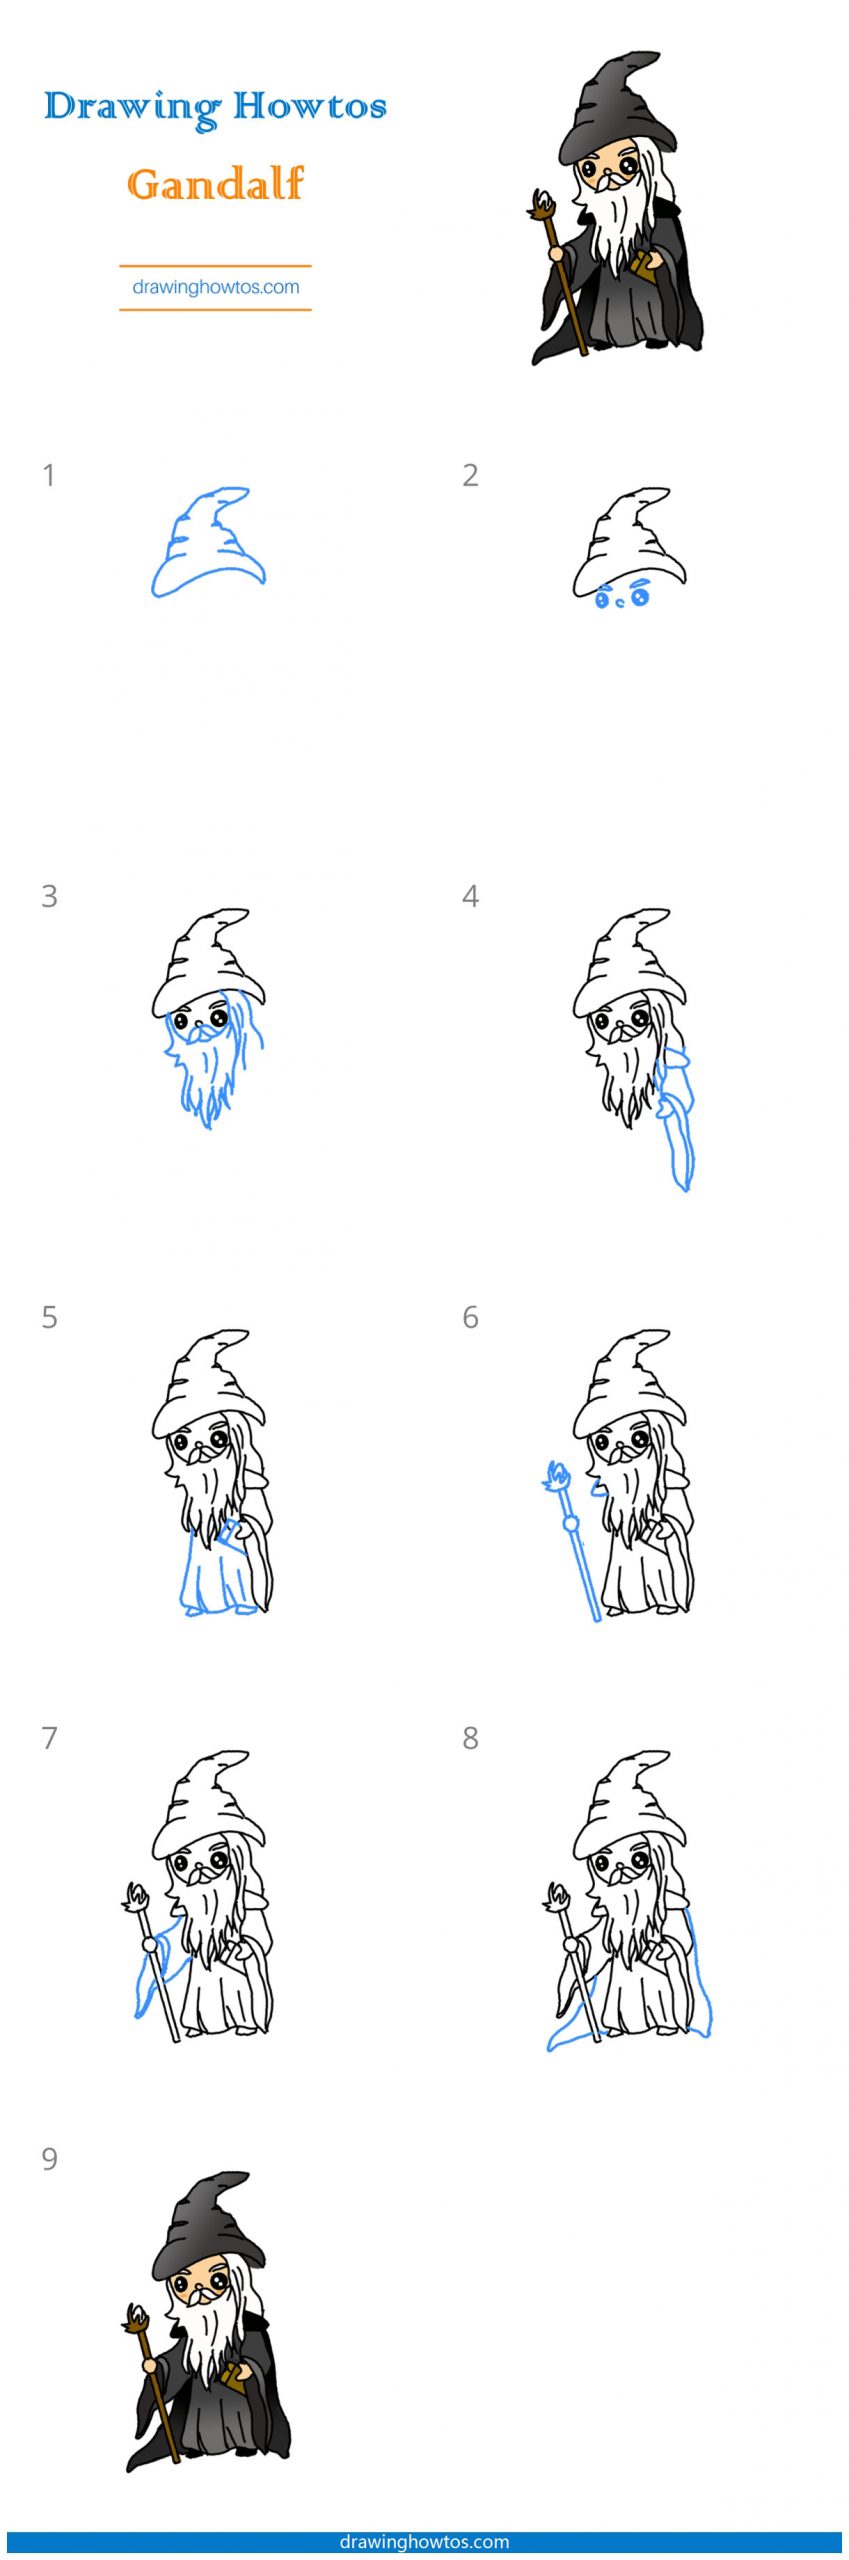 How to Draw Gandalf